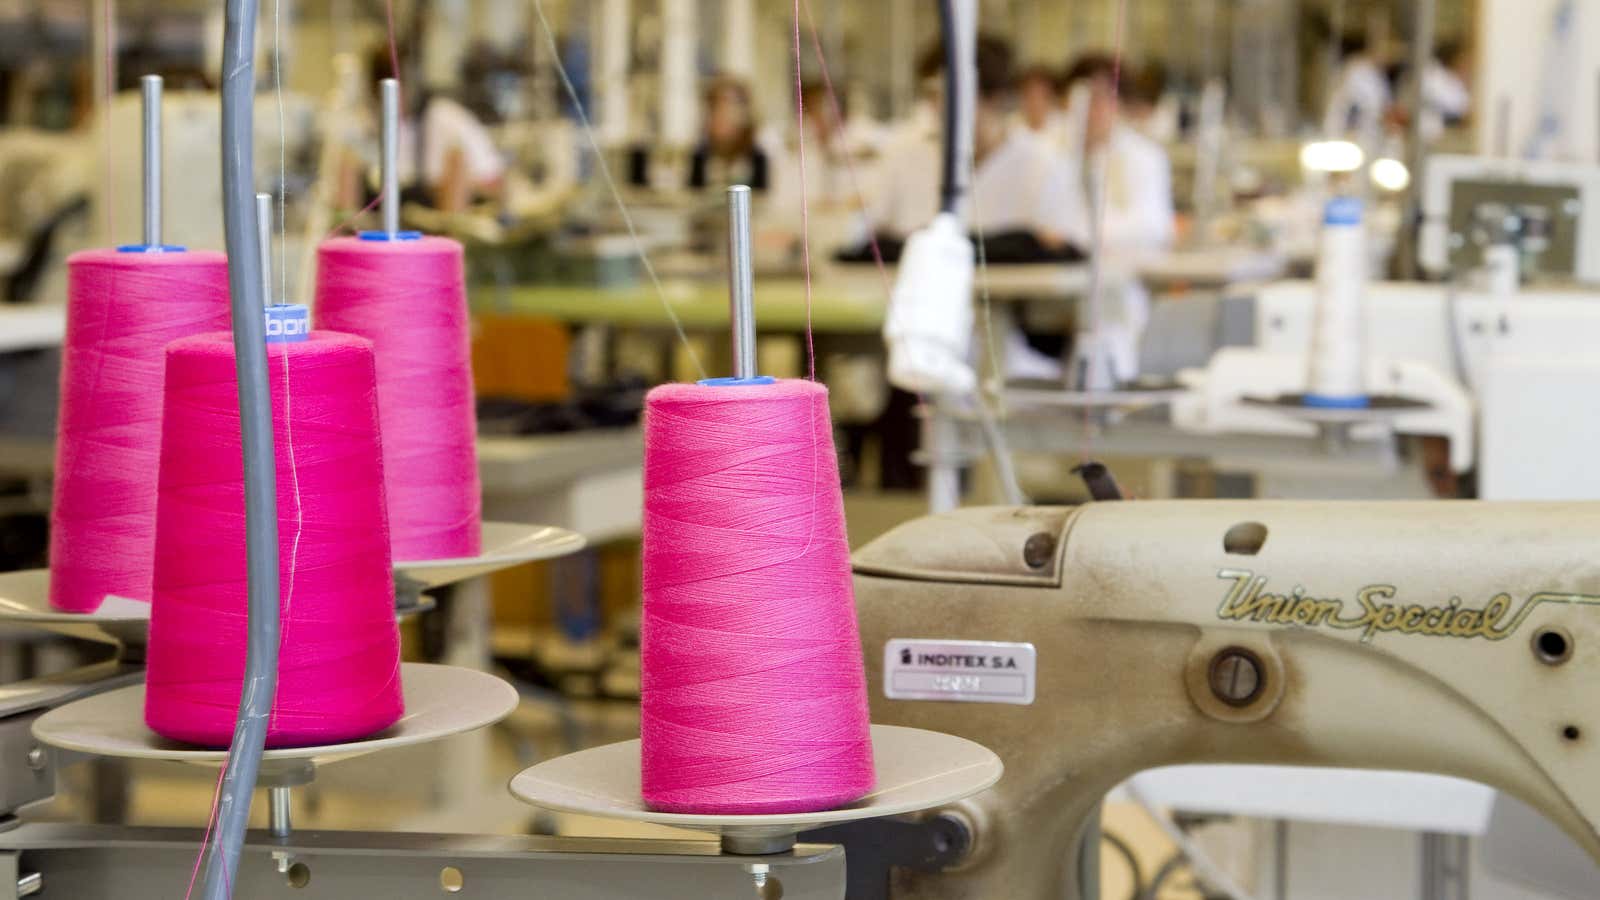 Zara’s supply chain, which originates in Spain where garments are produced, is the secret to its success.